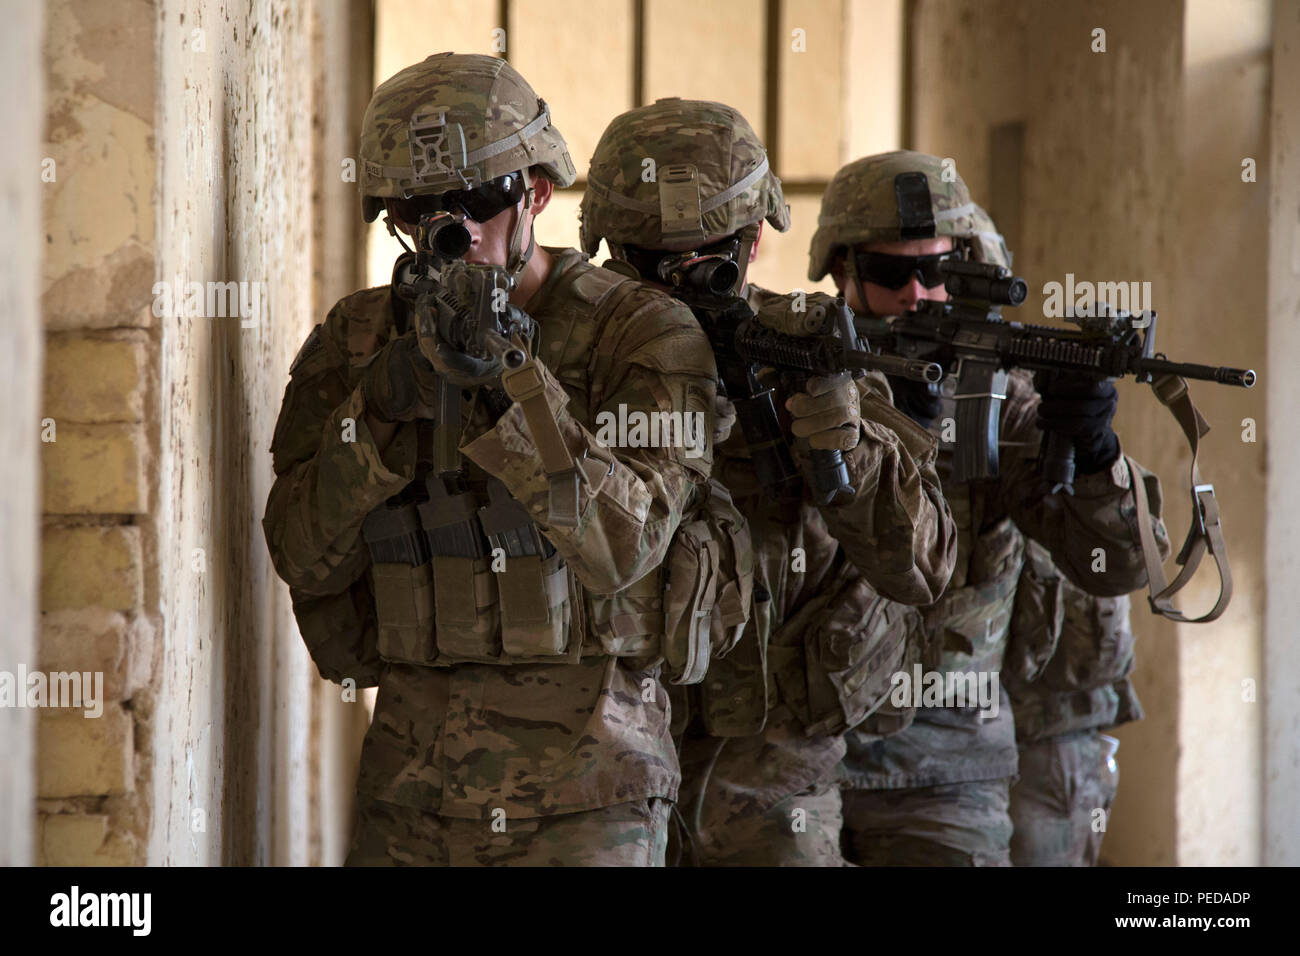 U.S. Army paratroopers assigned to Bravo Troop, 5th Squadron, 73rd Cavalry Regiment, 3rd Brigade, 82nd Airborne Division, maneuver through a hallway as part of squad level training at Camp Taji, Iraq, Aug. 3, 2015. Coalition forces routinely practice what they plan to teach Iraqi soldiers prior to each round of instruction. Training at the building partner capacity sites is an integral part of Combined Joint Task Force – Operation Inherent Resolve’s multinational effort to train Iraqi security force personnel to defeat the Islamic State of Iraq and the Levant. A coalition of regional and inter Stock Photo